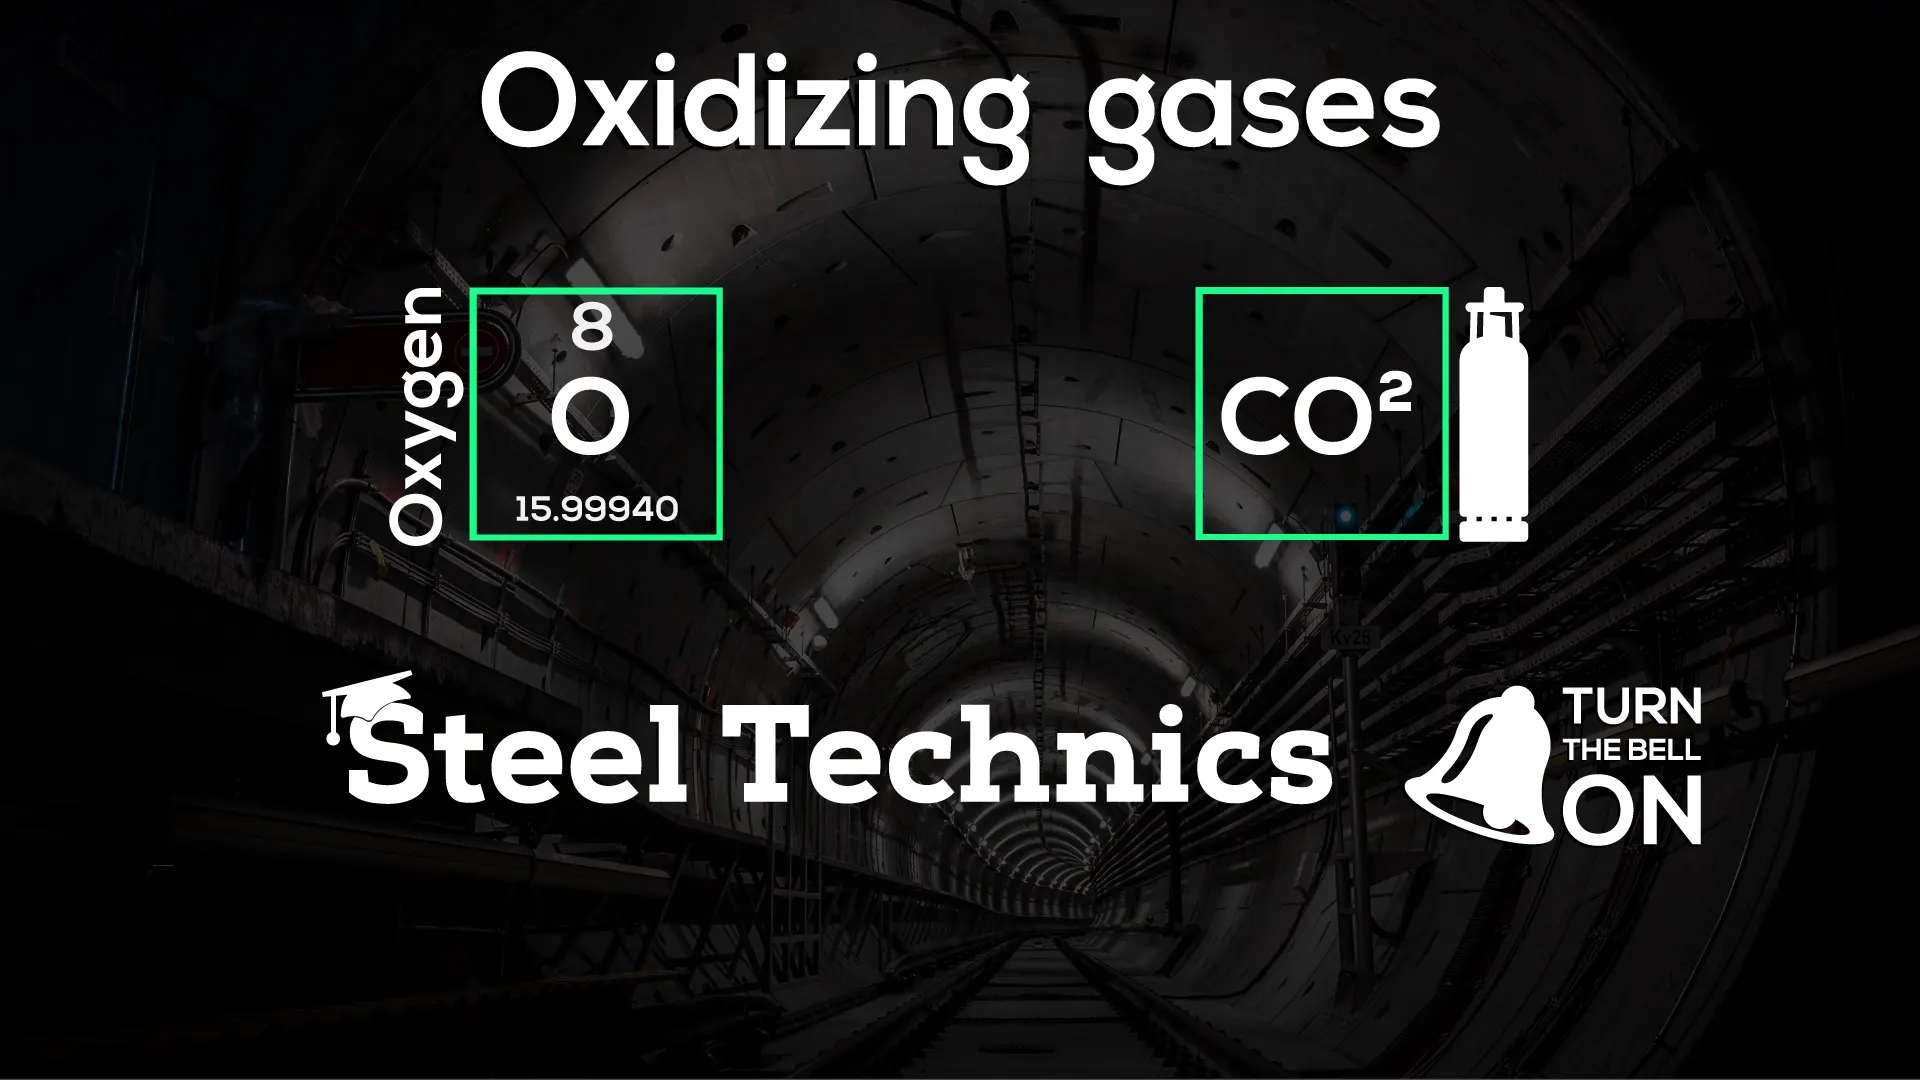 Oxidizing gases used in welding.